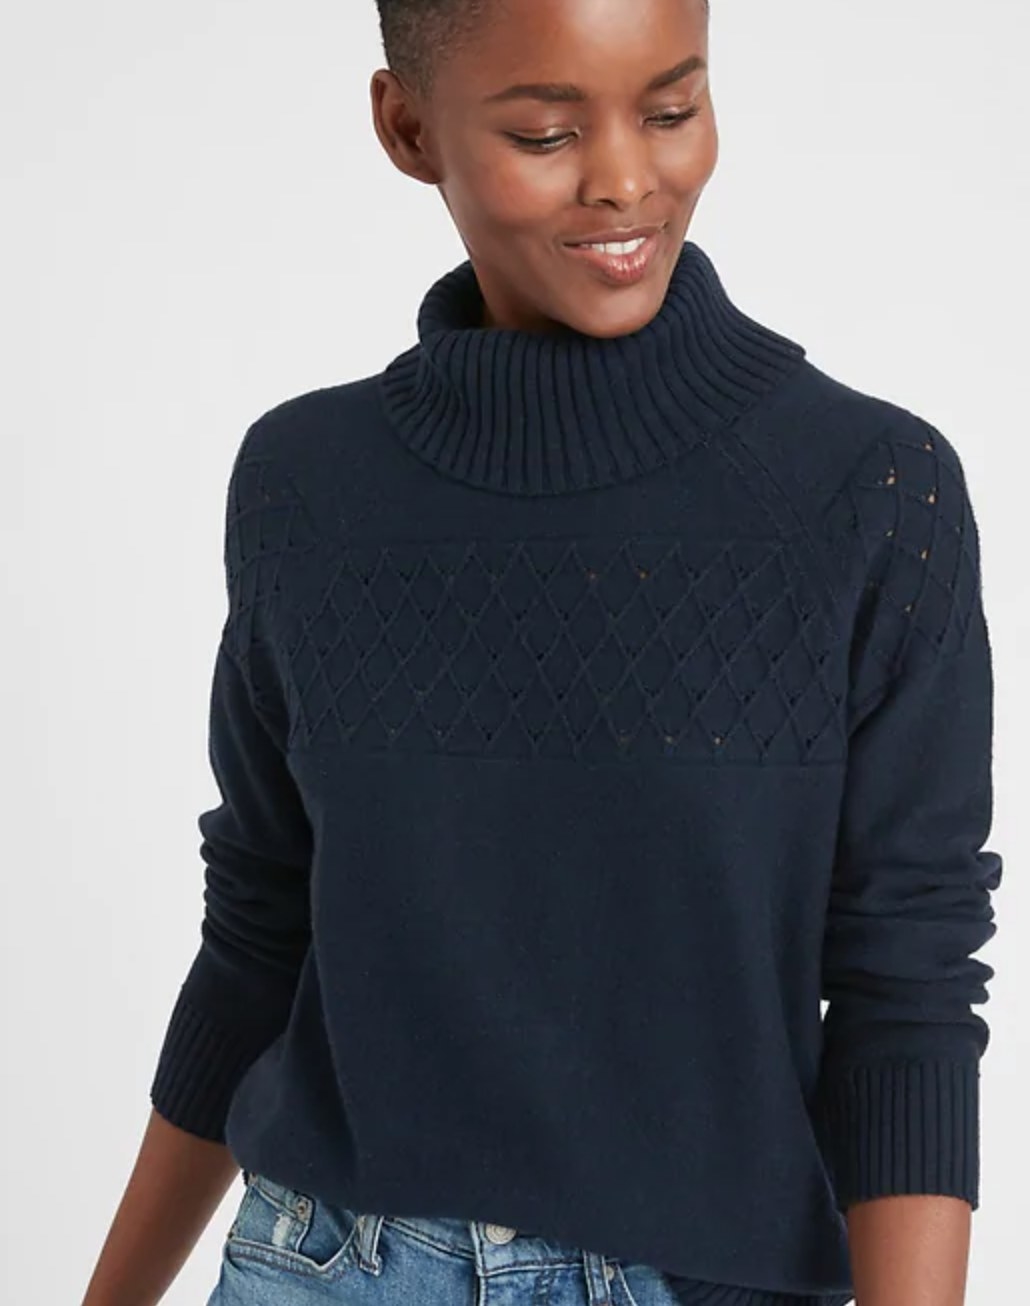 The turtleneck sweater in navy